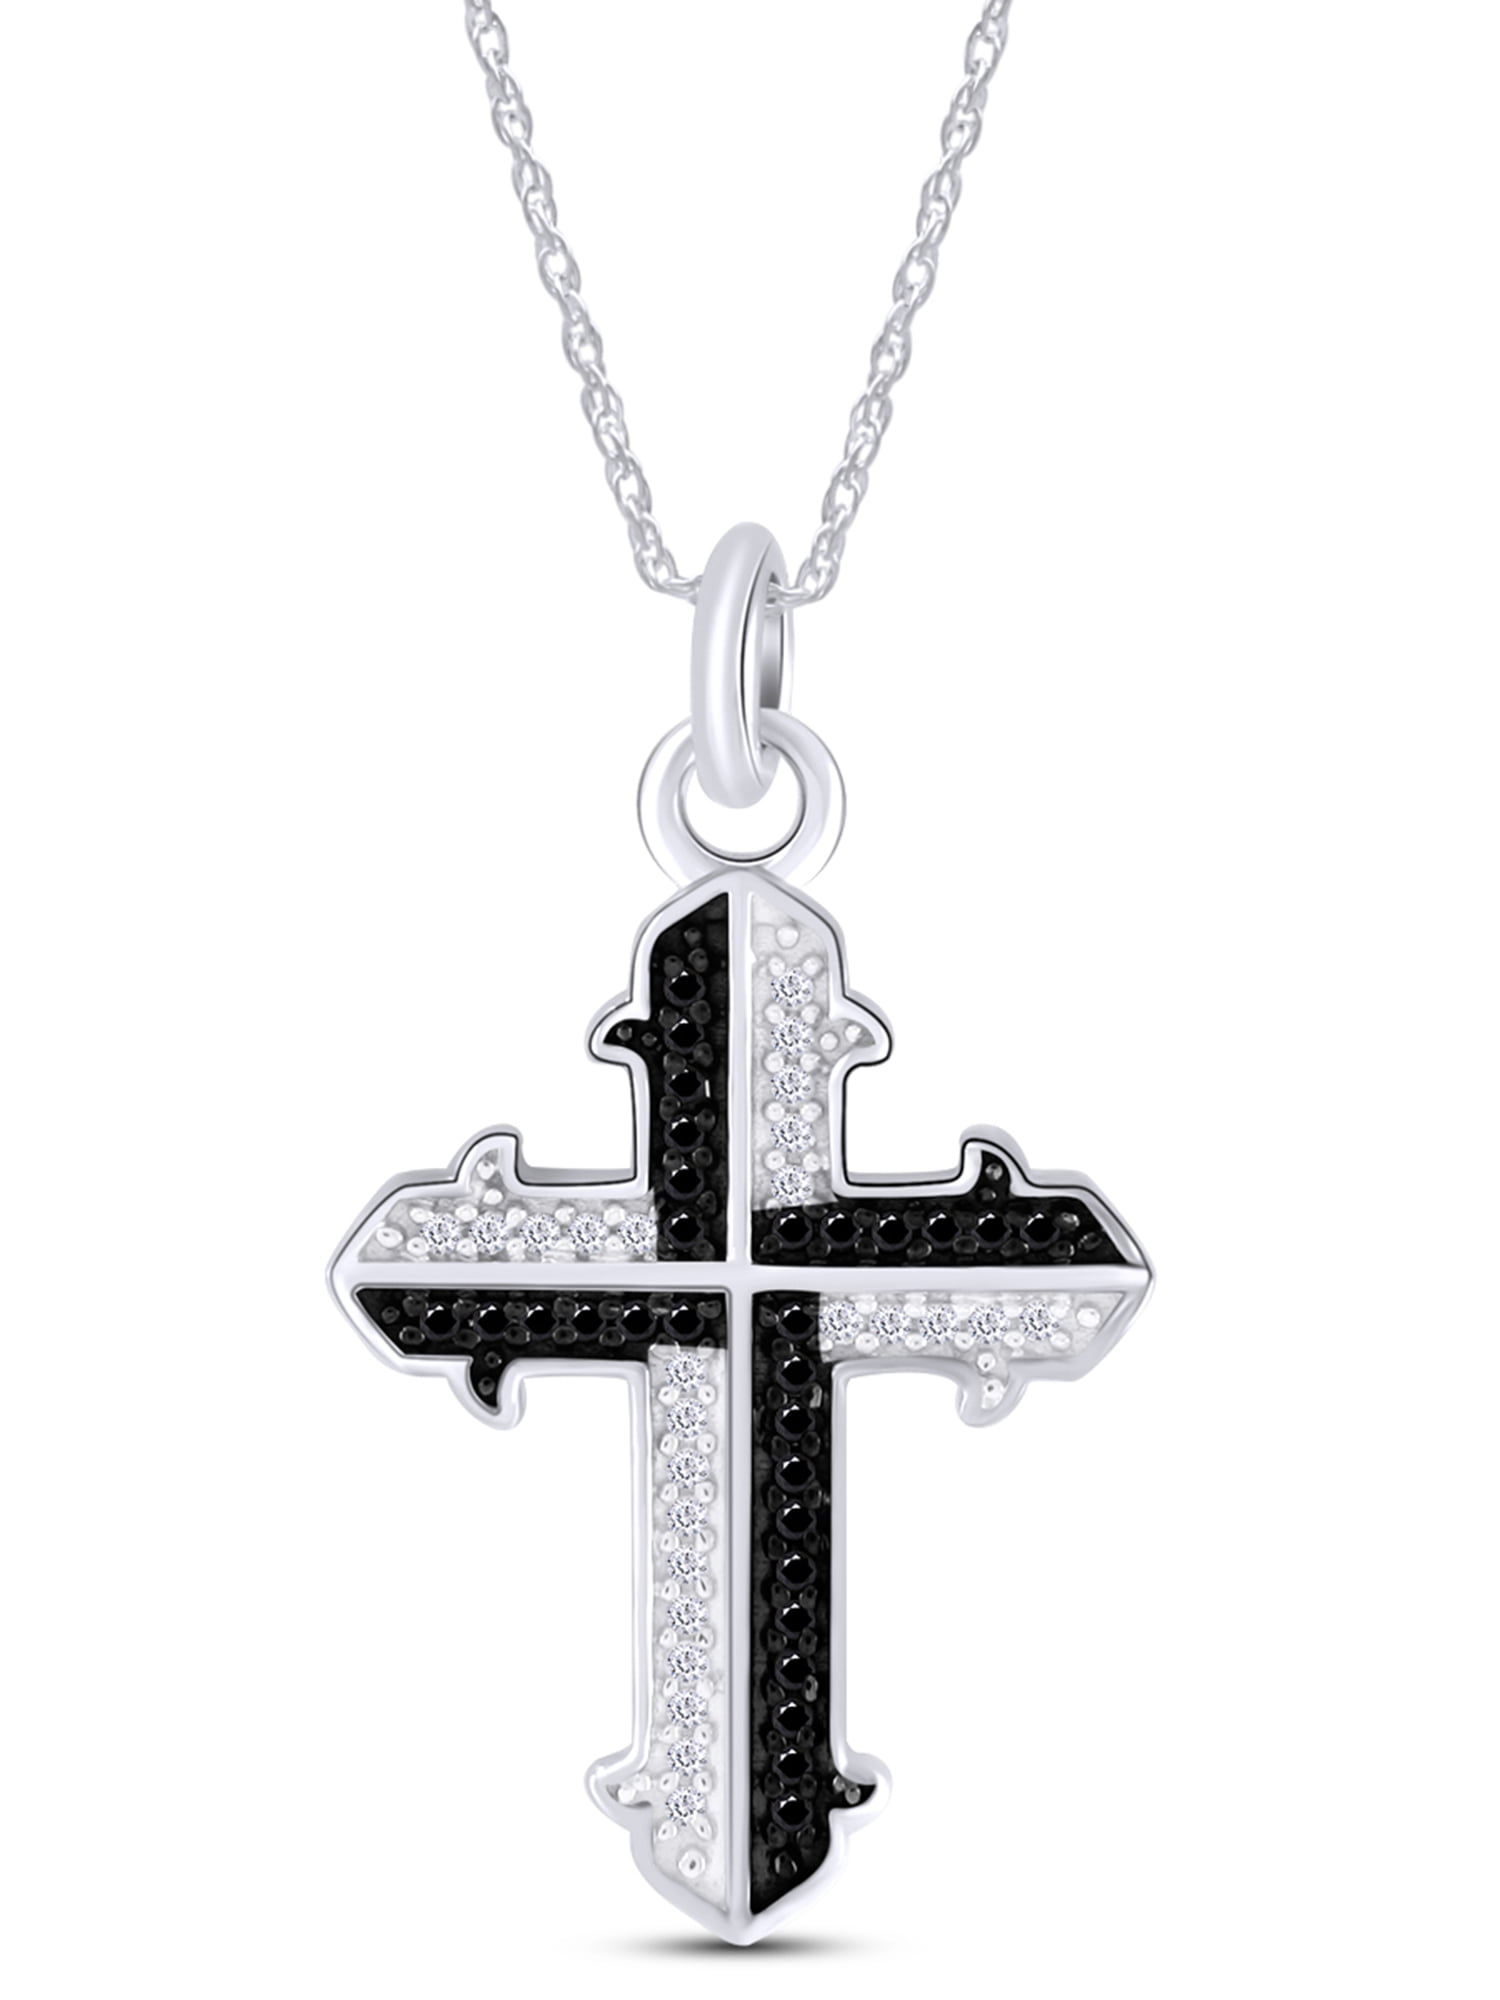 AFFY 0.38 CT Round Cut White Cubic Zirconia Cross Pendant Necklace in14k Gold Over Sterling Silver